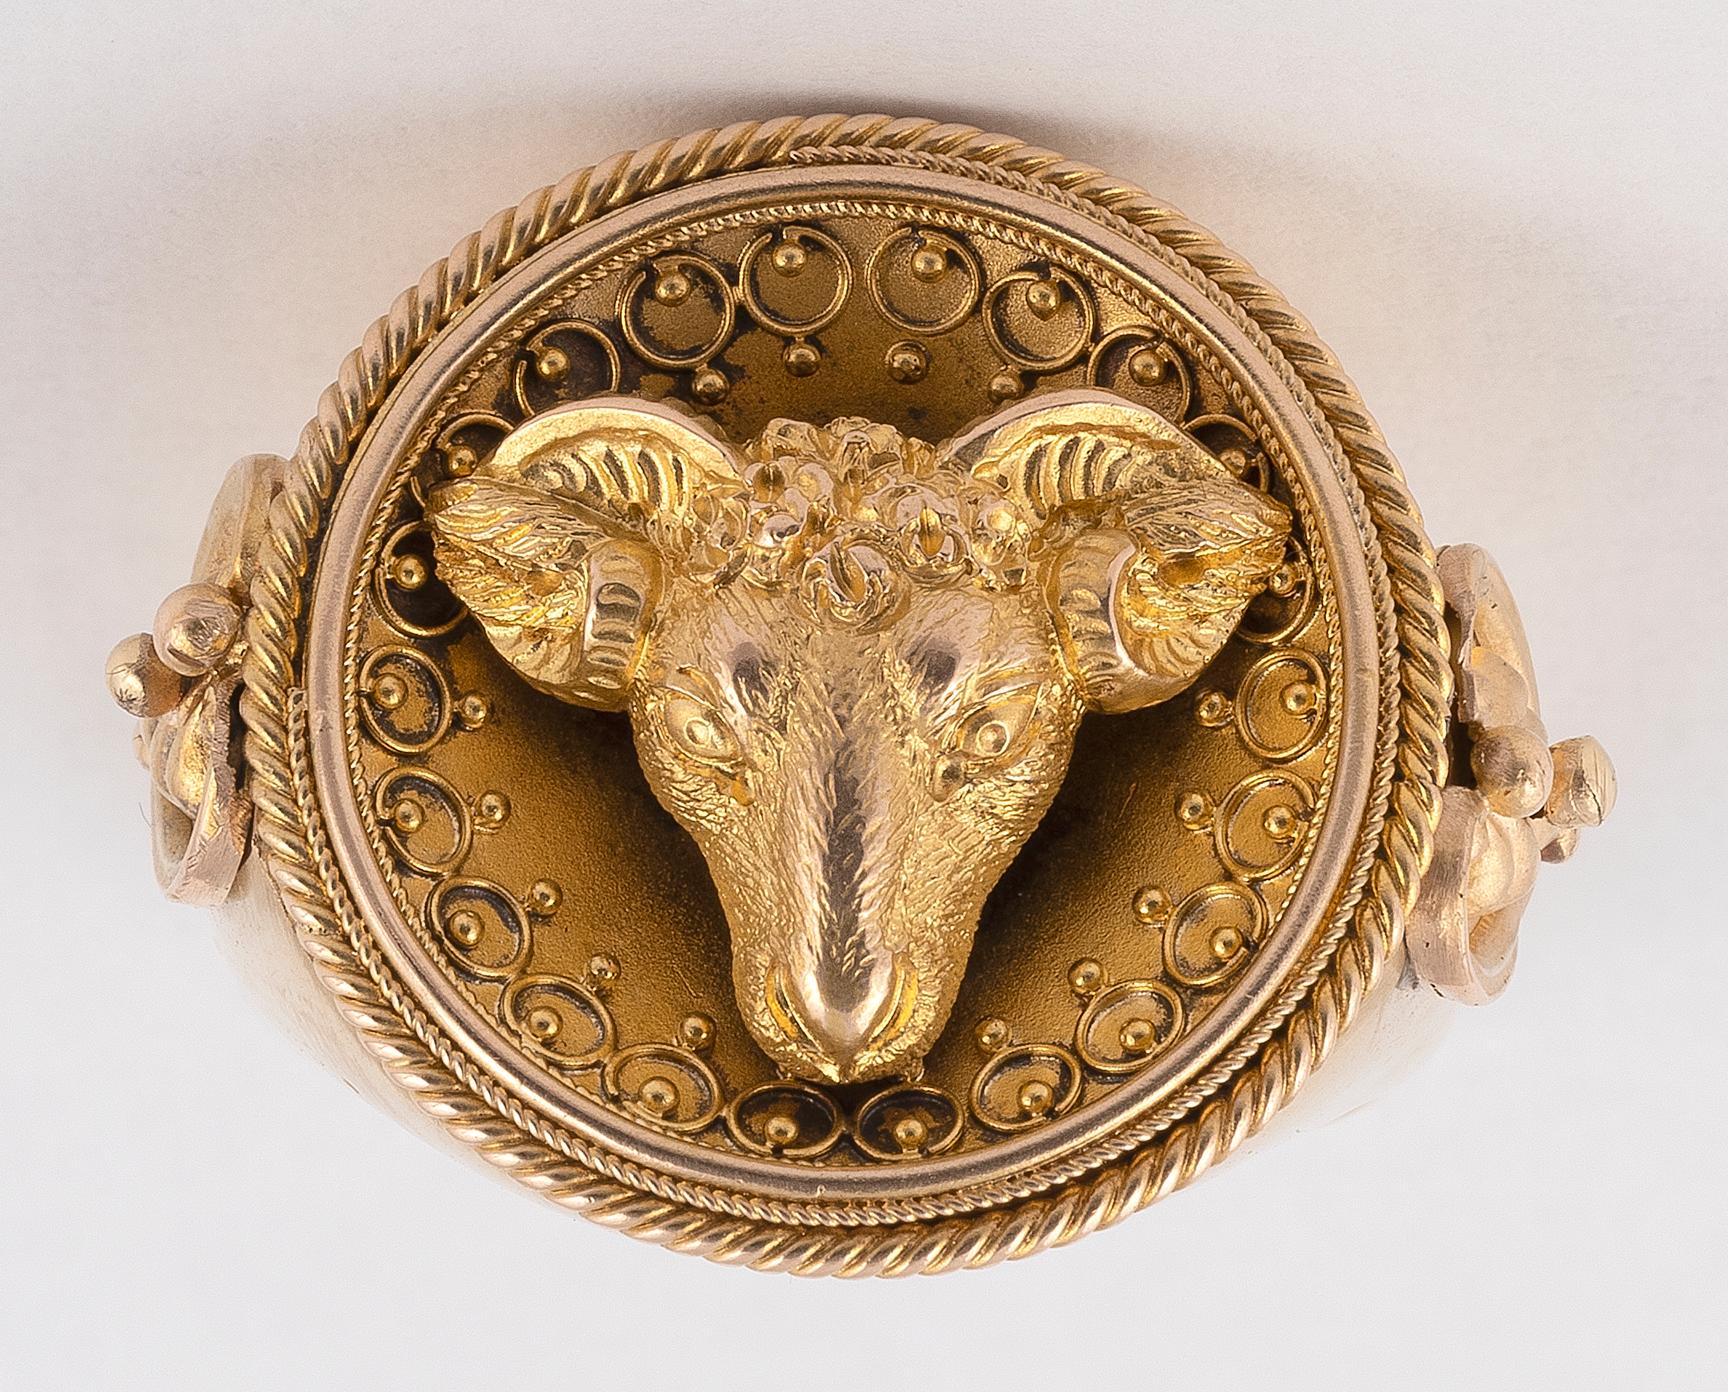 Possibly by Streeter & Co, depicting a ram's head within circular centre section, with beaded and wirework decoration within ropetwist border in yellow gold.
Size 7